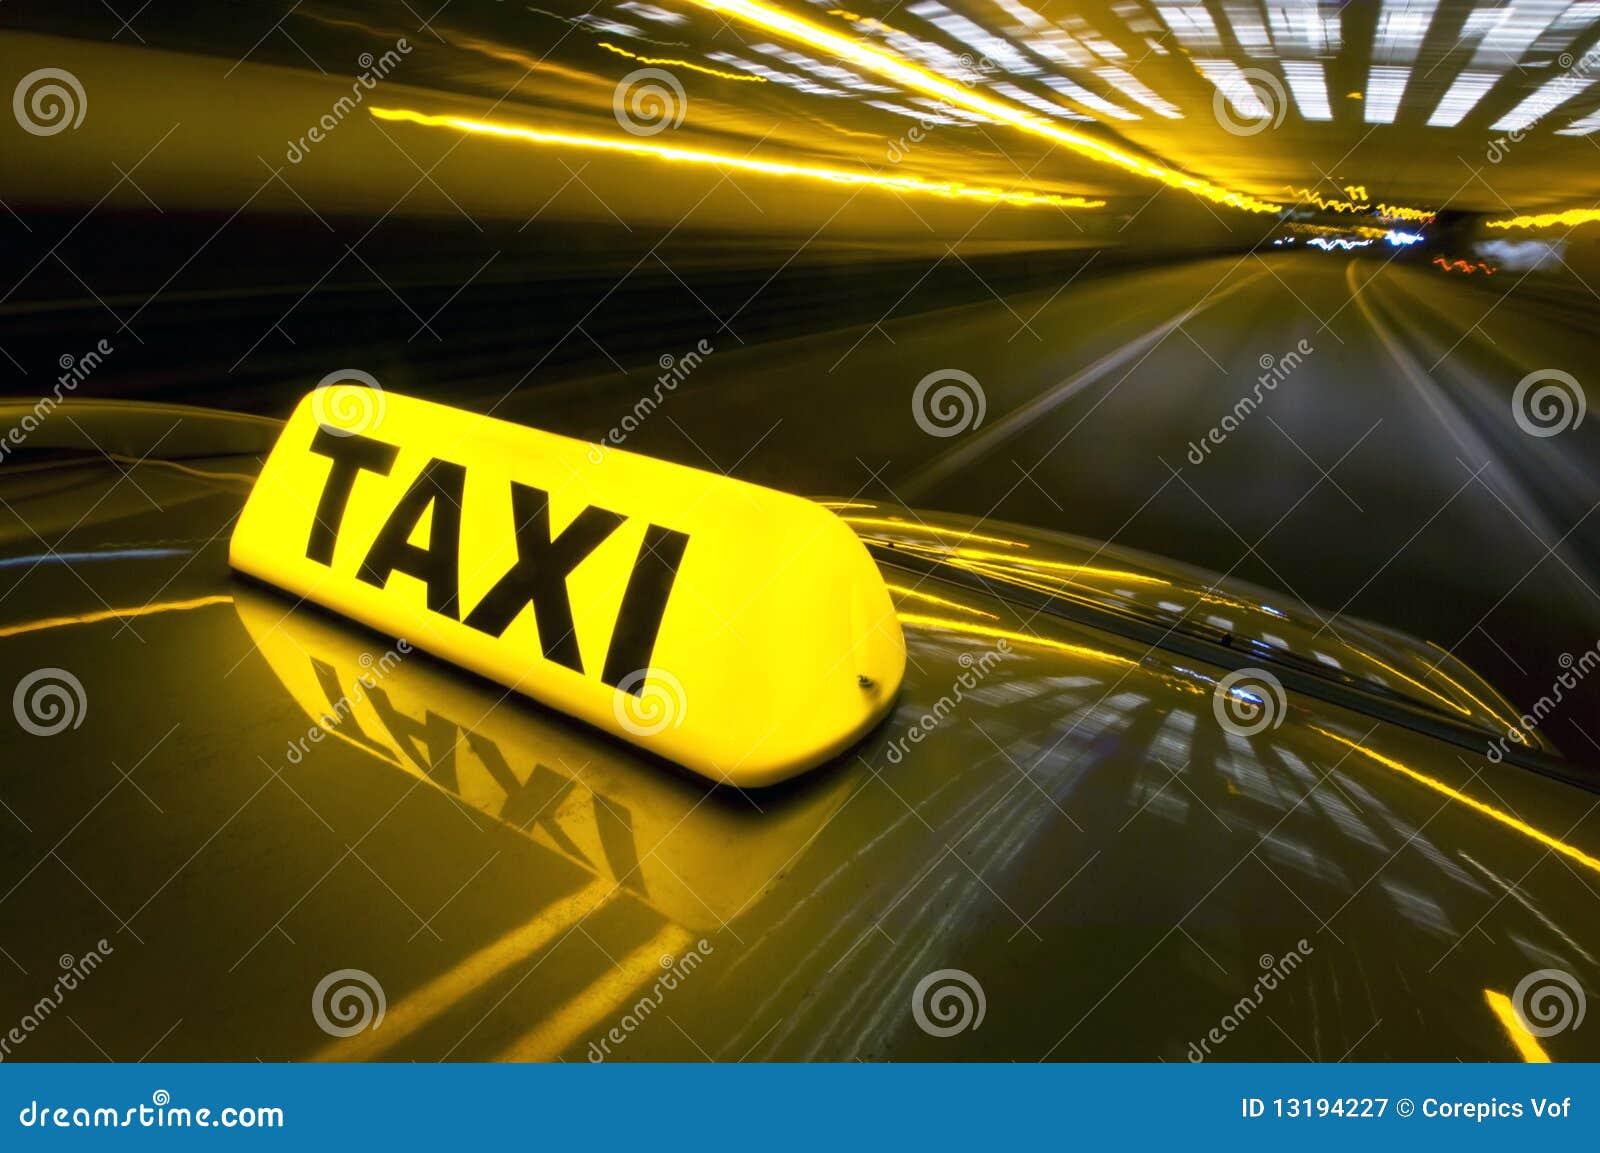 fast taxi